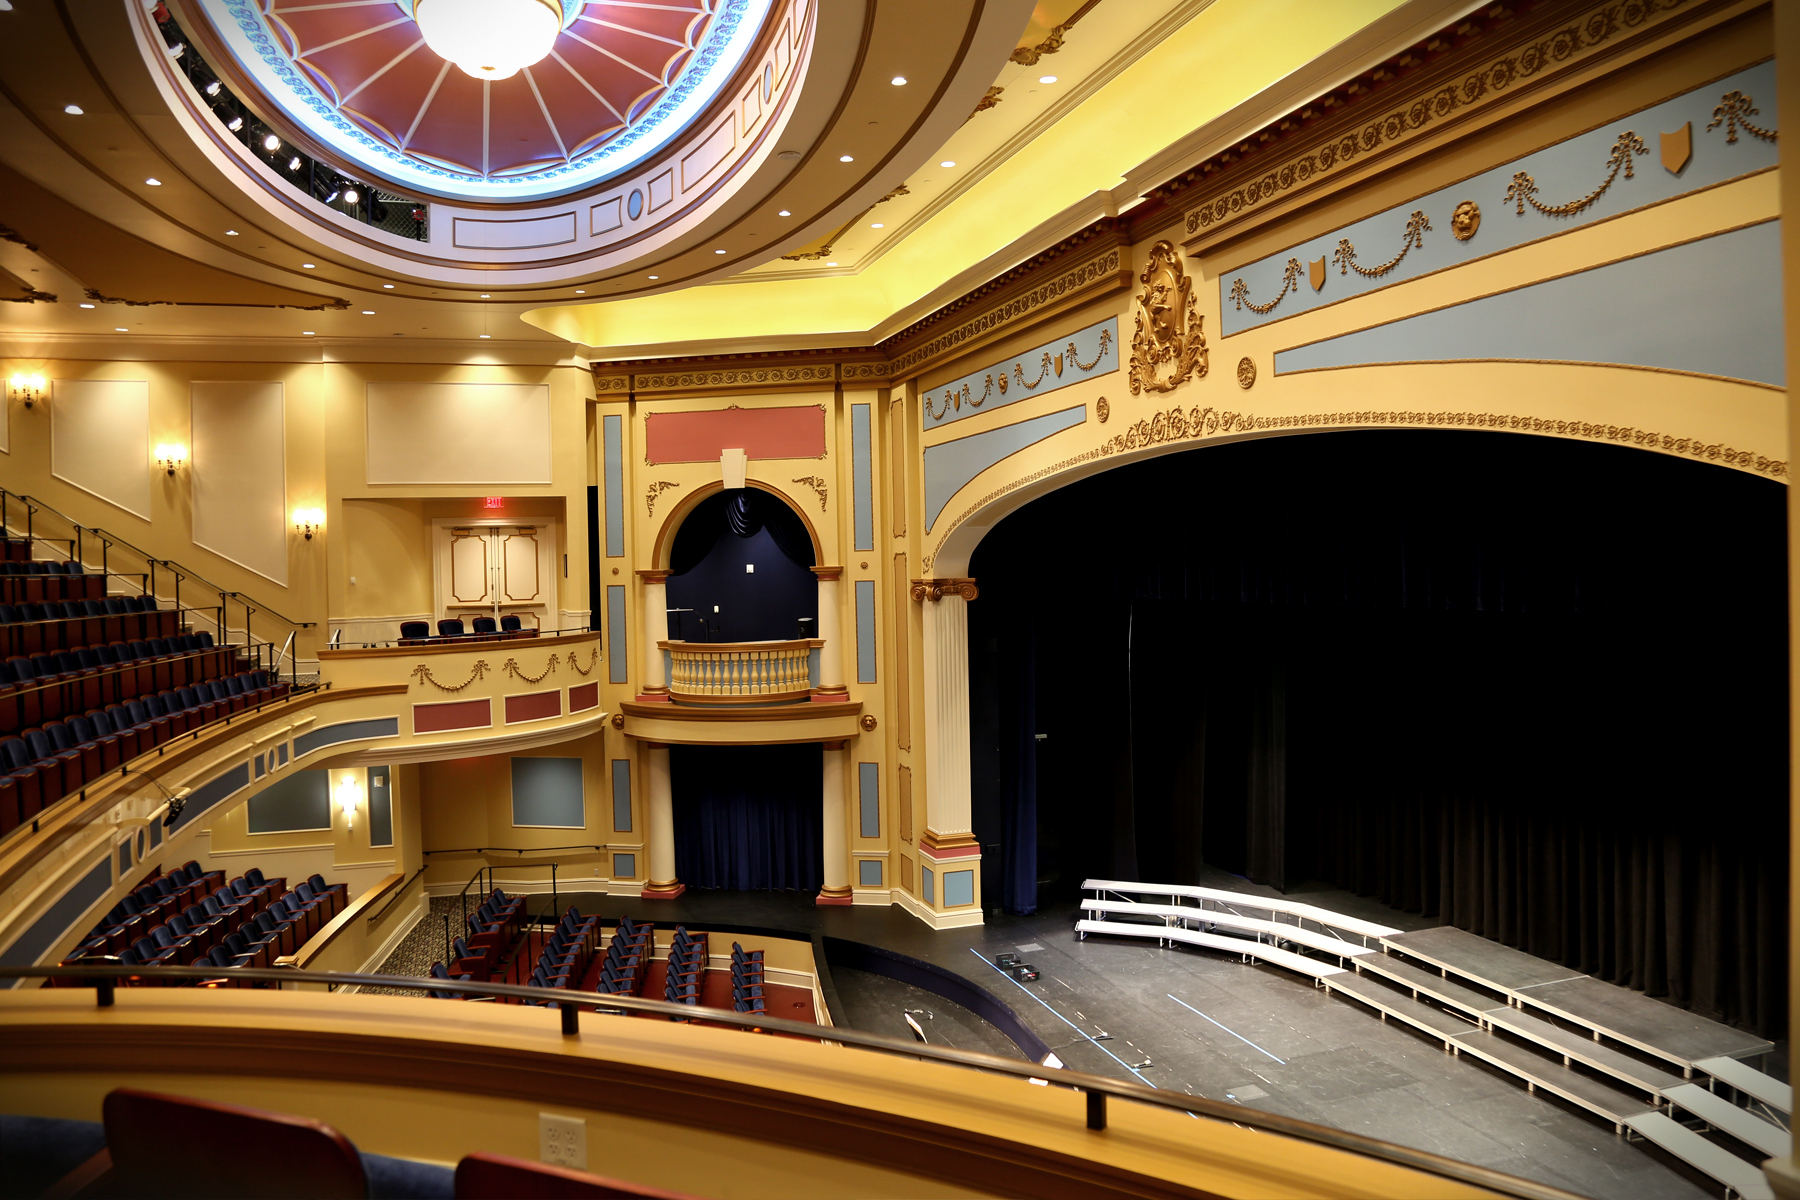 View of the theater and stage from the balcony of the Performing Arts Center of the Catholic Private School.